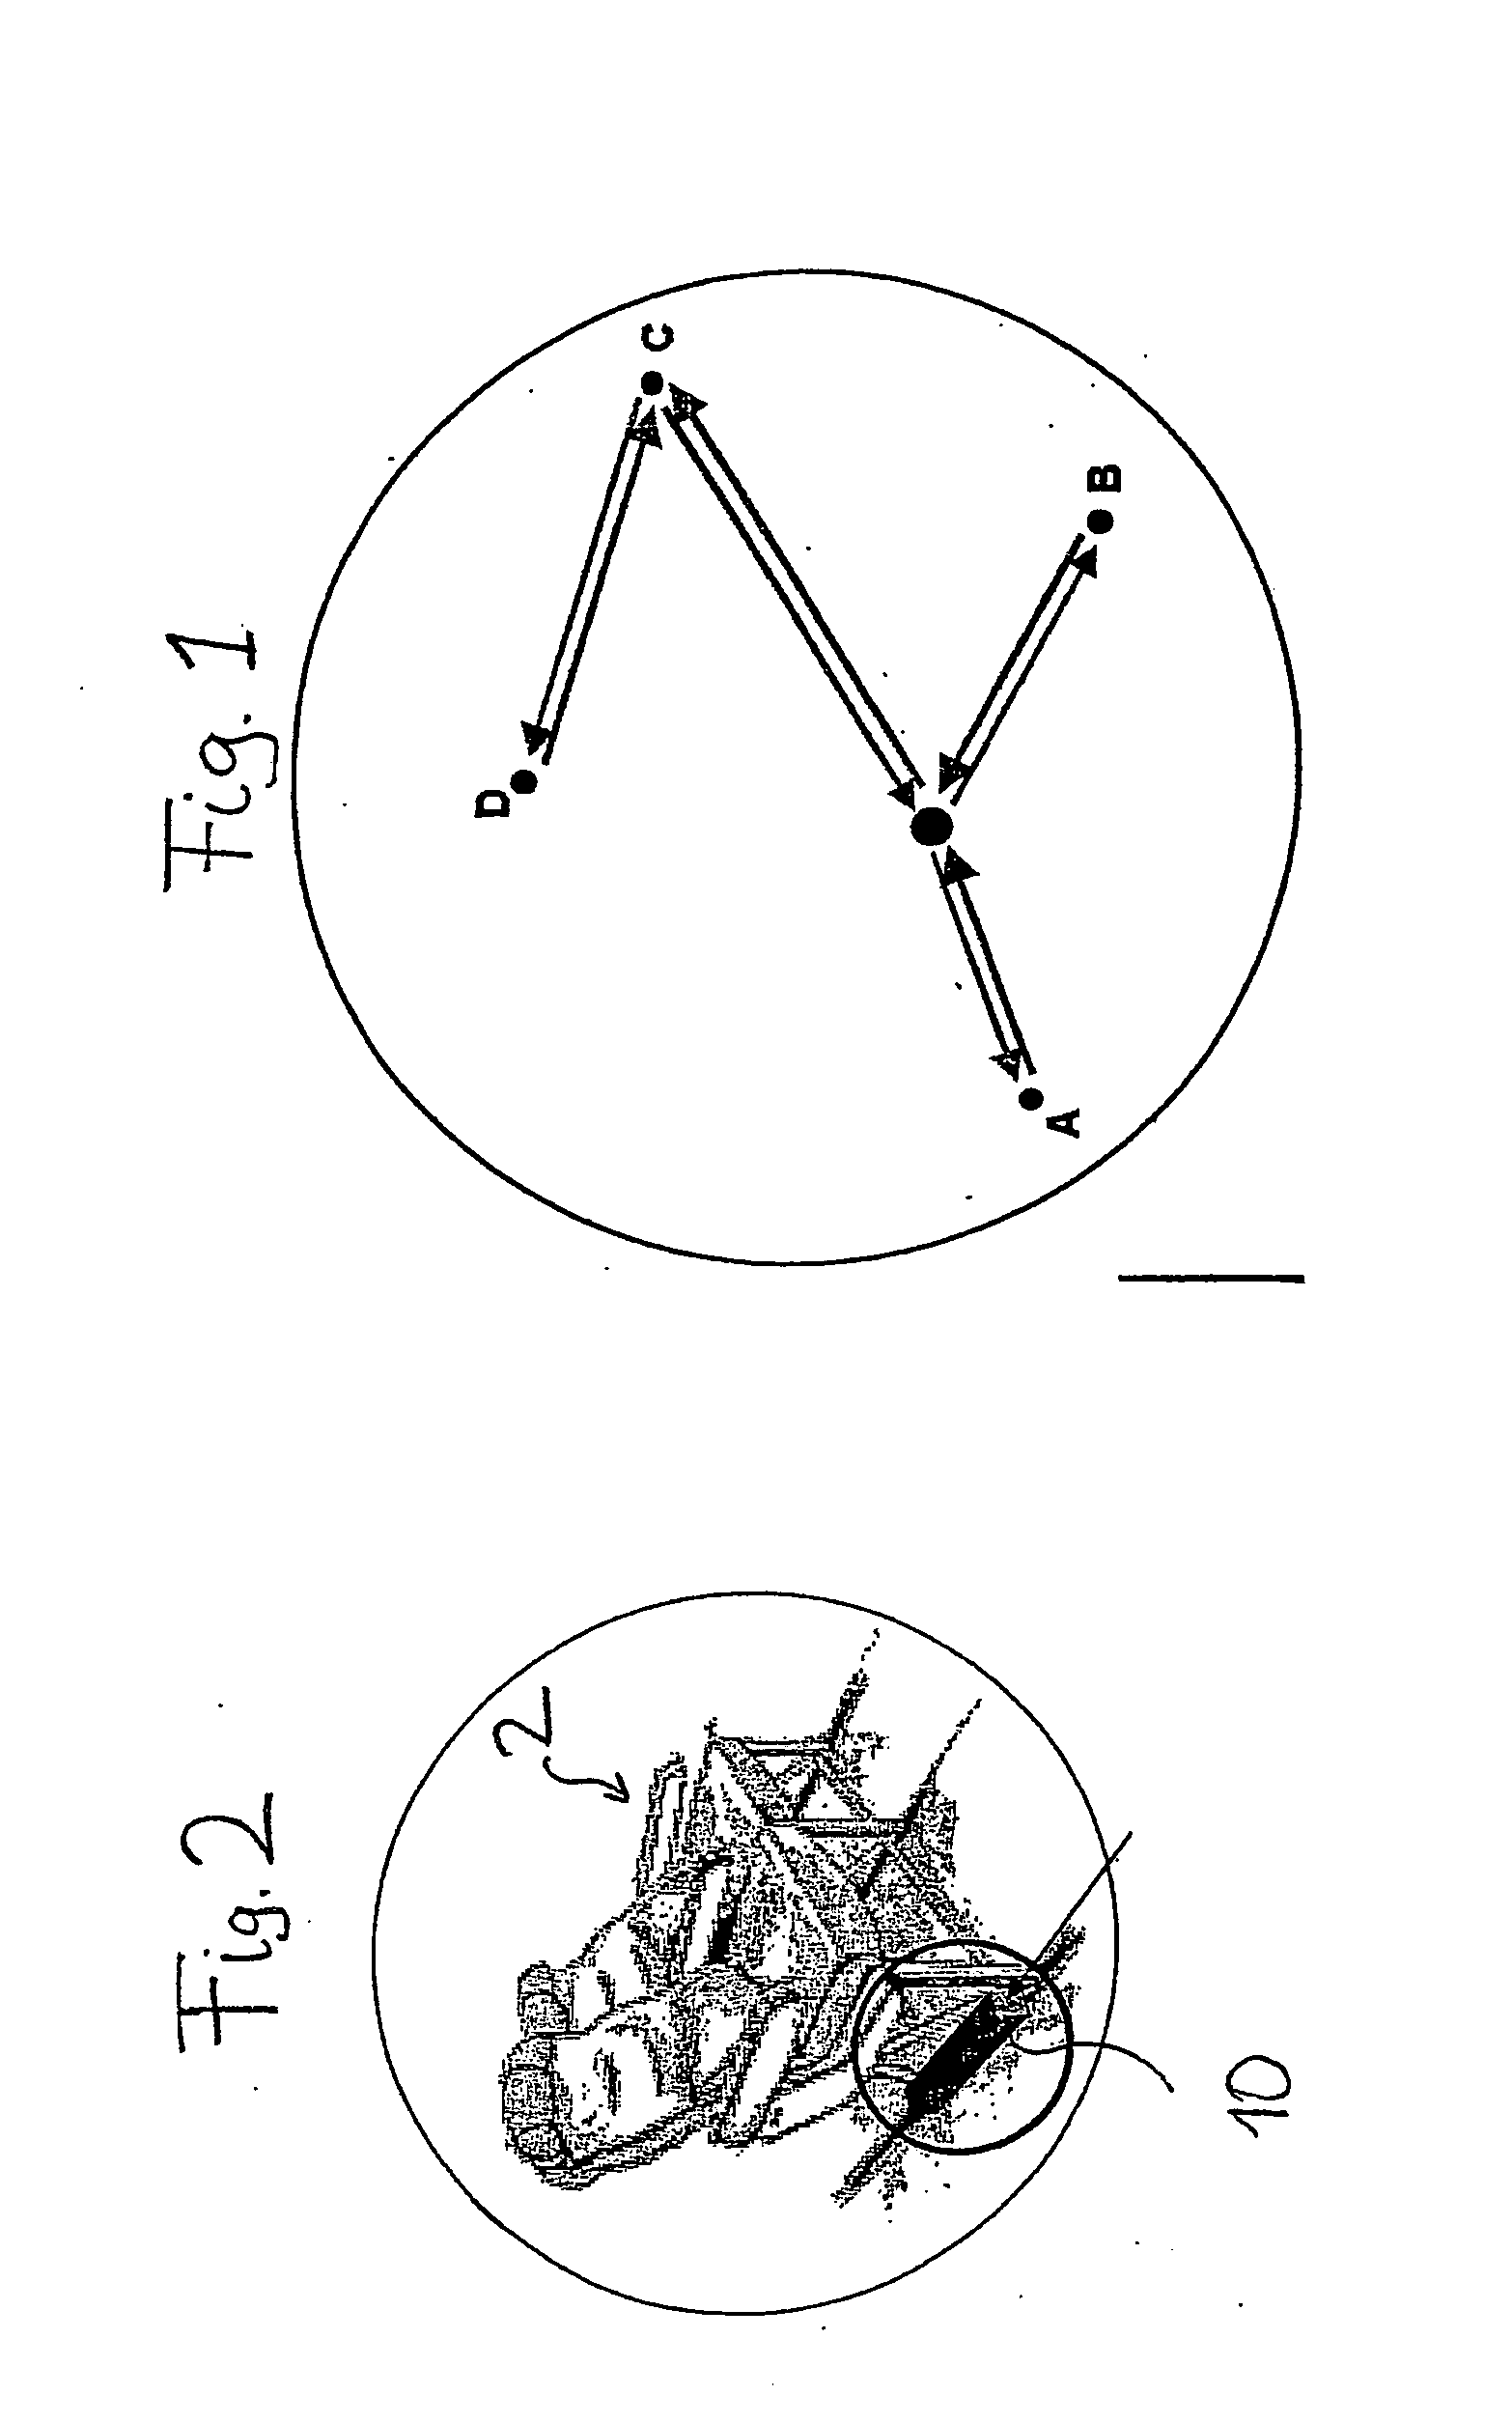 Method and device for adapting the seat row arrangement in passenger planes according to need